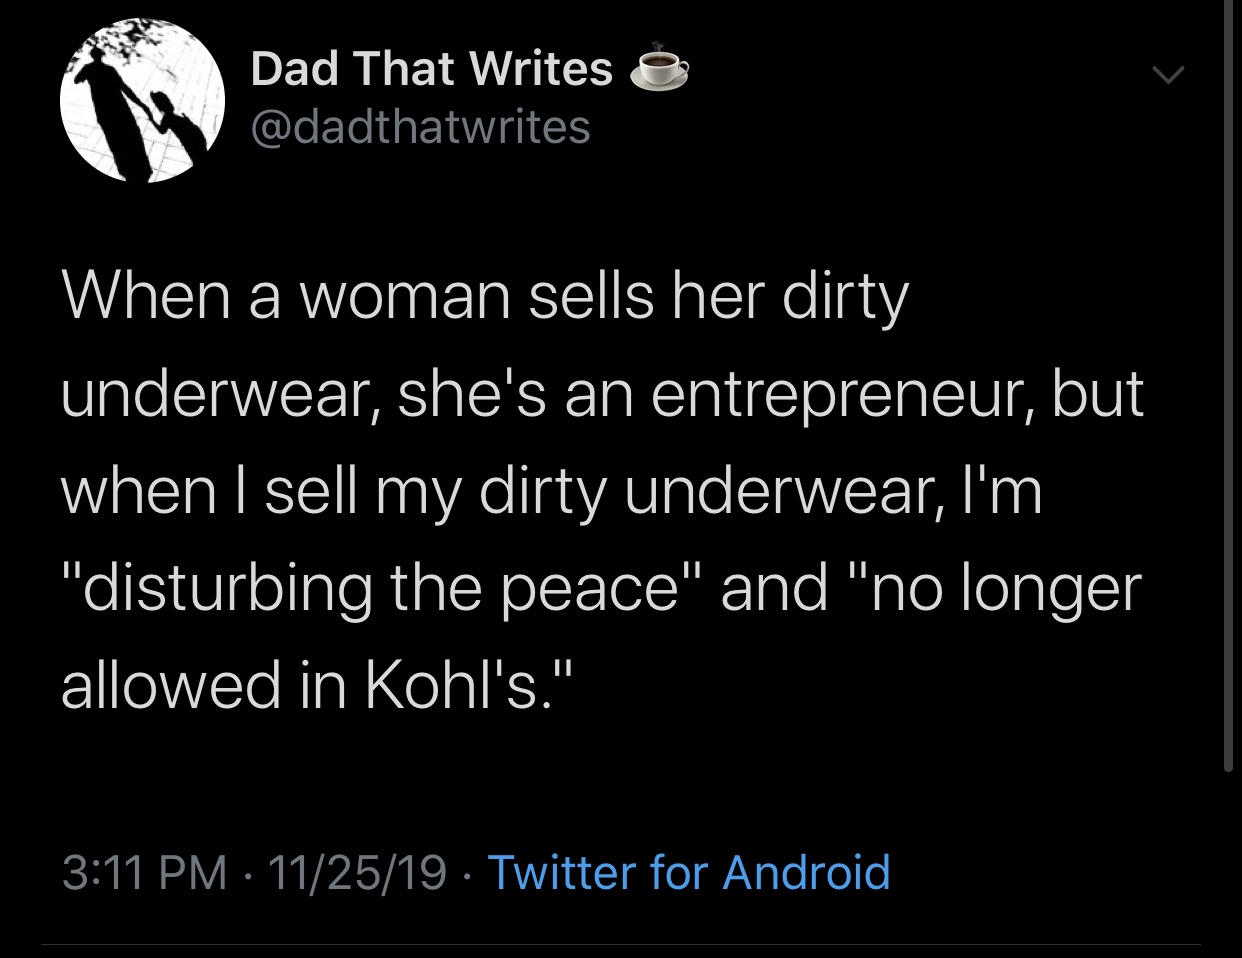 meme - screenshot - Dad That Writes e When a woman sells her dirty underwear, she's an entrepreneur, but when I sell my dirty underwear, I'm "disturbing the peace" and "no longer allowed in Kohl's." 112519 . Twitter for Android,